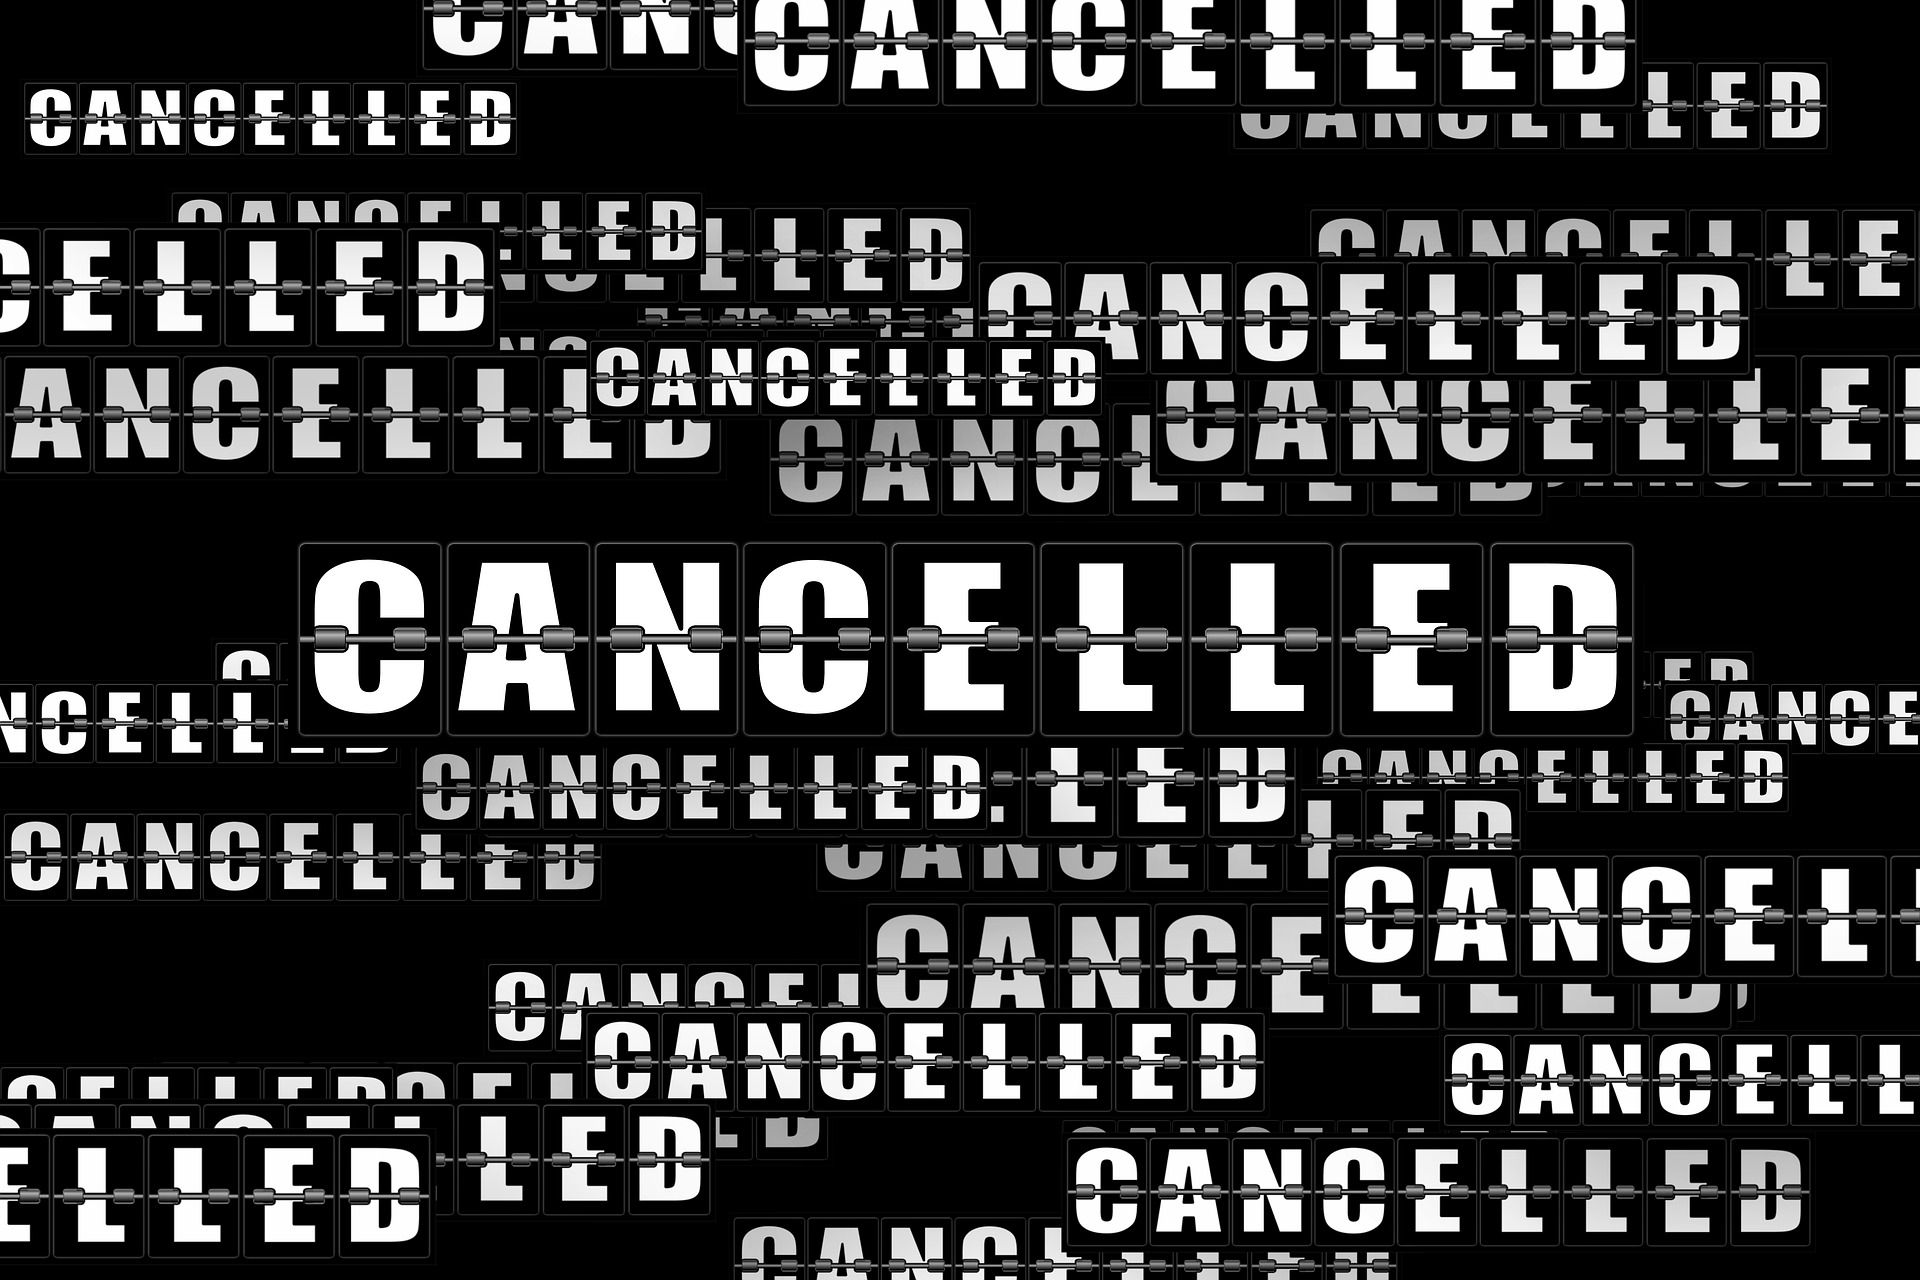 Topic 15: Is cancel culture #cancelled?